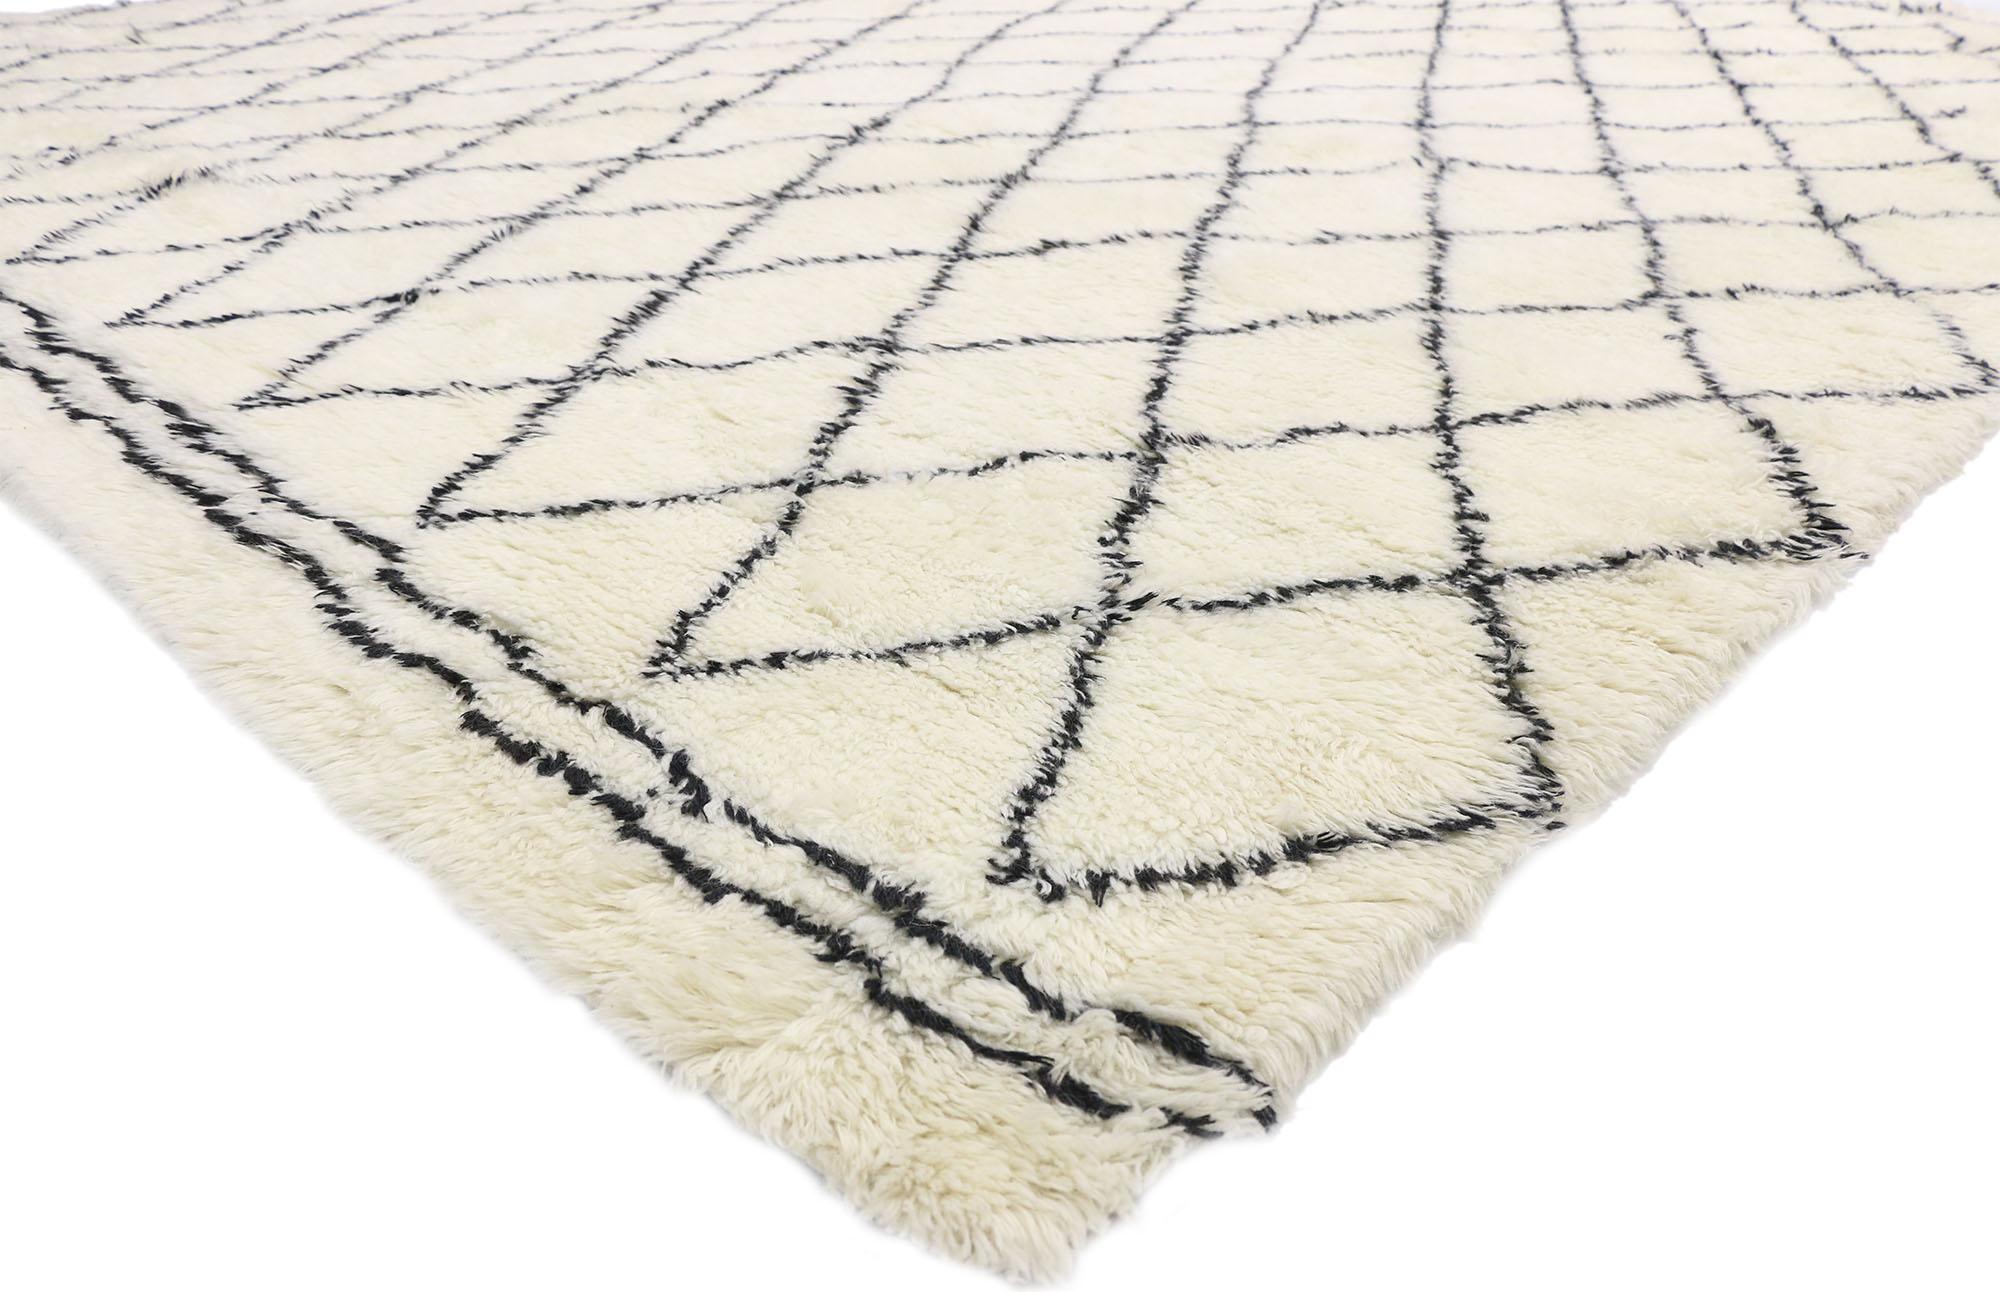 30411, contemporary Moroccan style area rug with Minimalist appeal. This hand knotted wool contemporary Moroccan style rug features a simplistic all-over diamond lattice pattern spread across an abrashed creamy-vanilla field. The black lines